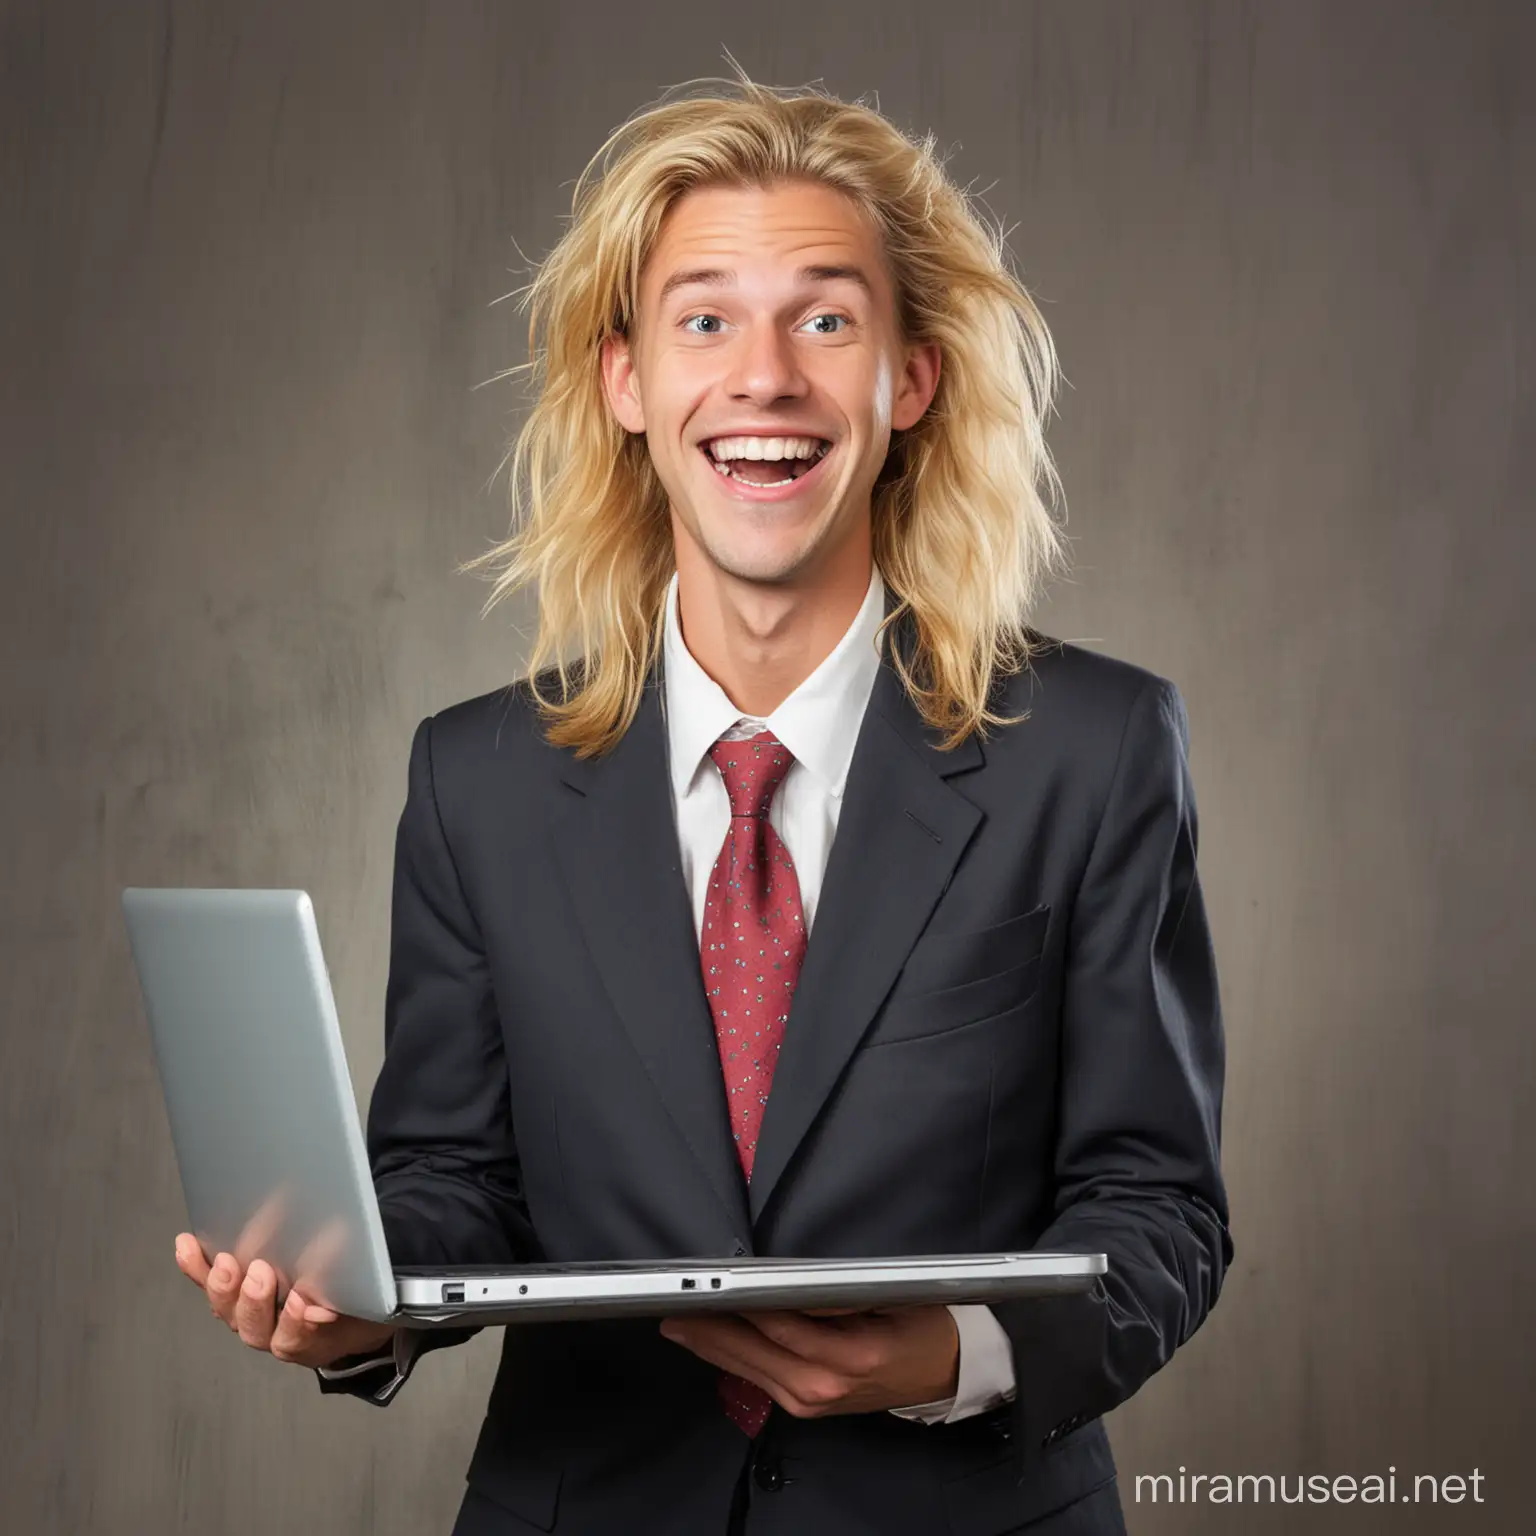 ugly Hillbilly with goofy smile with shoulder length blond hair in a suit smiling with a laptop in his hands. Make the person unreasonably ugly
